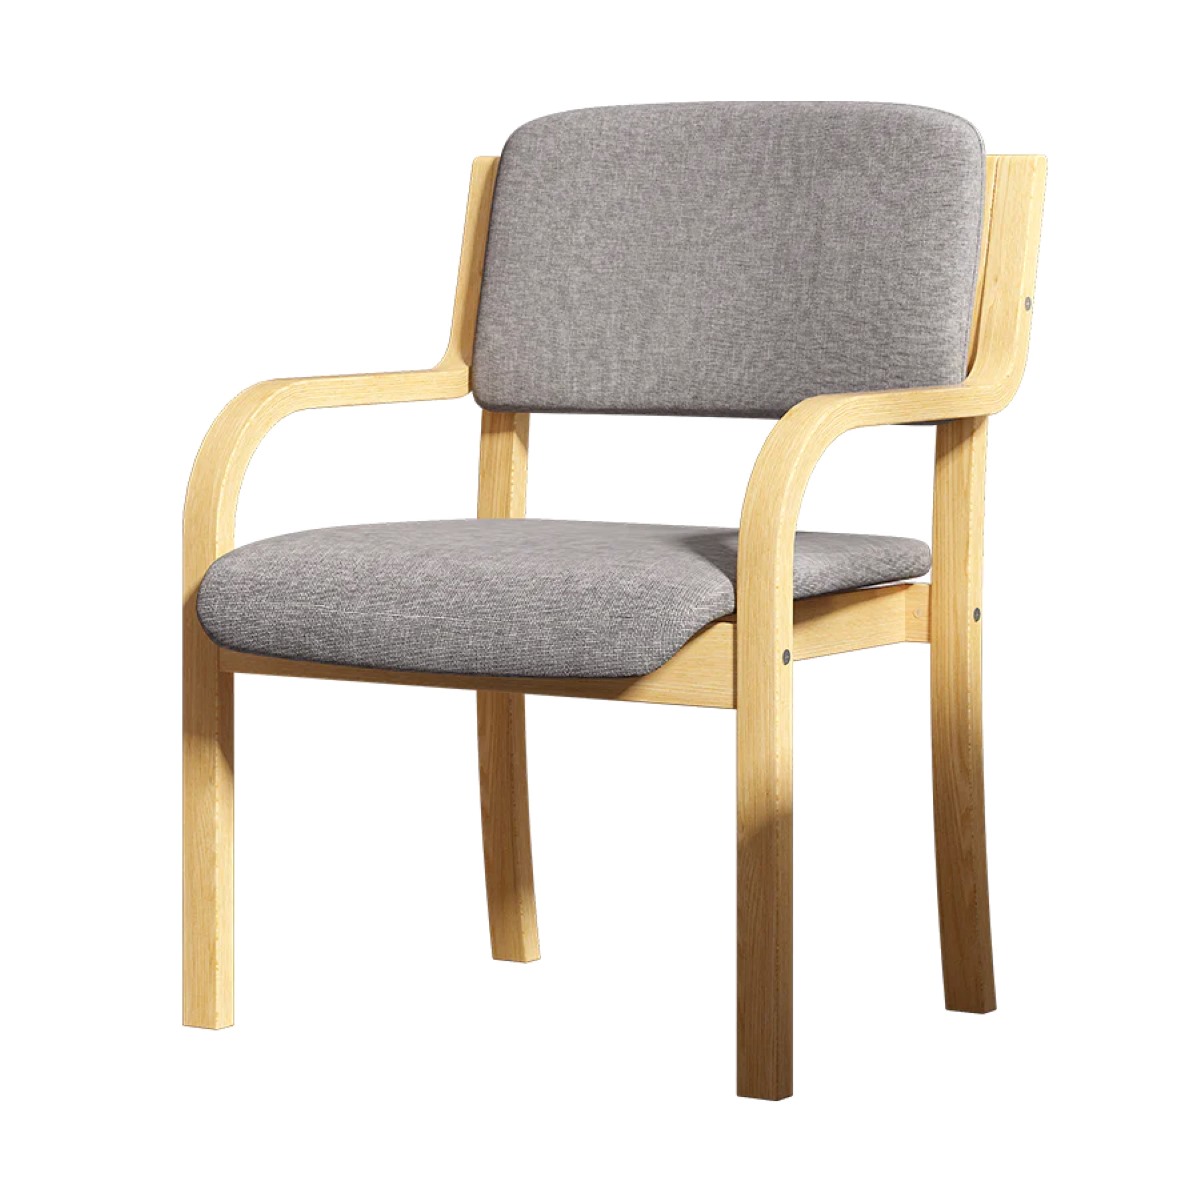 What Is A Dining Room Chair With Arms Called